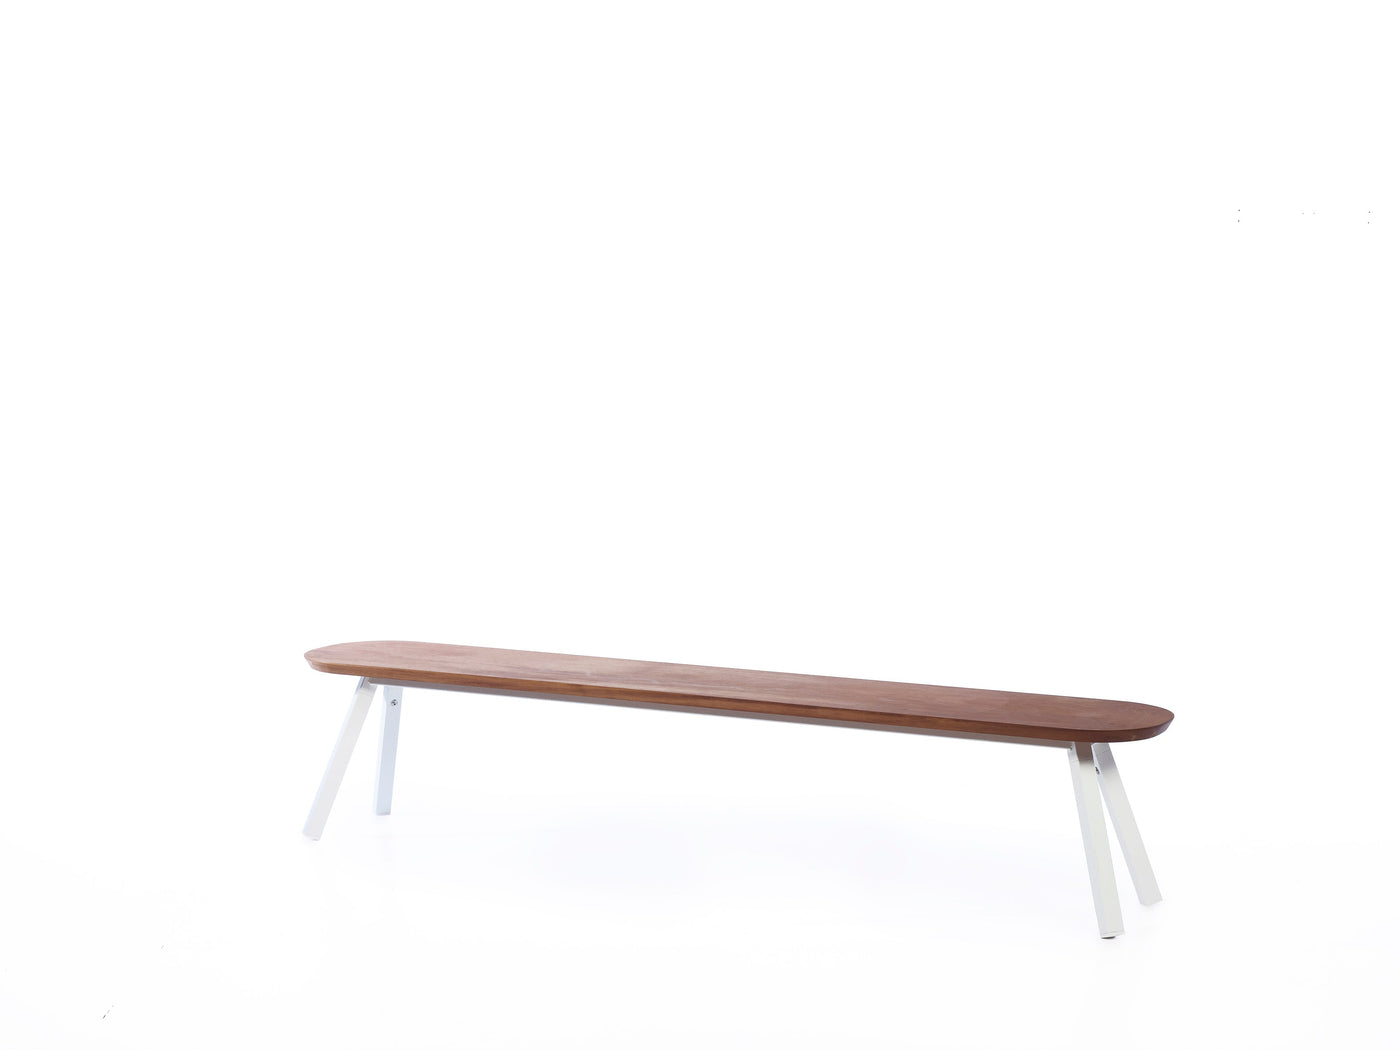 RS Barcelona You and Me Indoor / Outdoor Bench 220 Iroko, Kit of Two